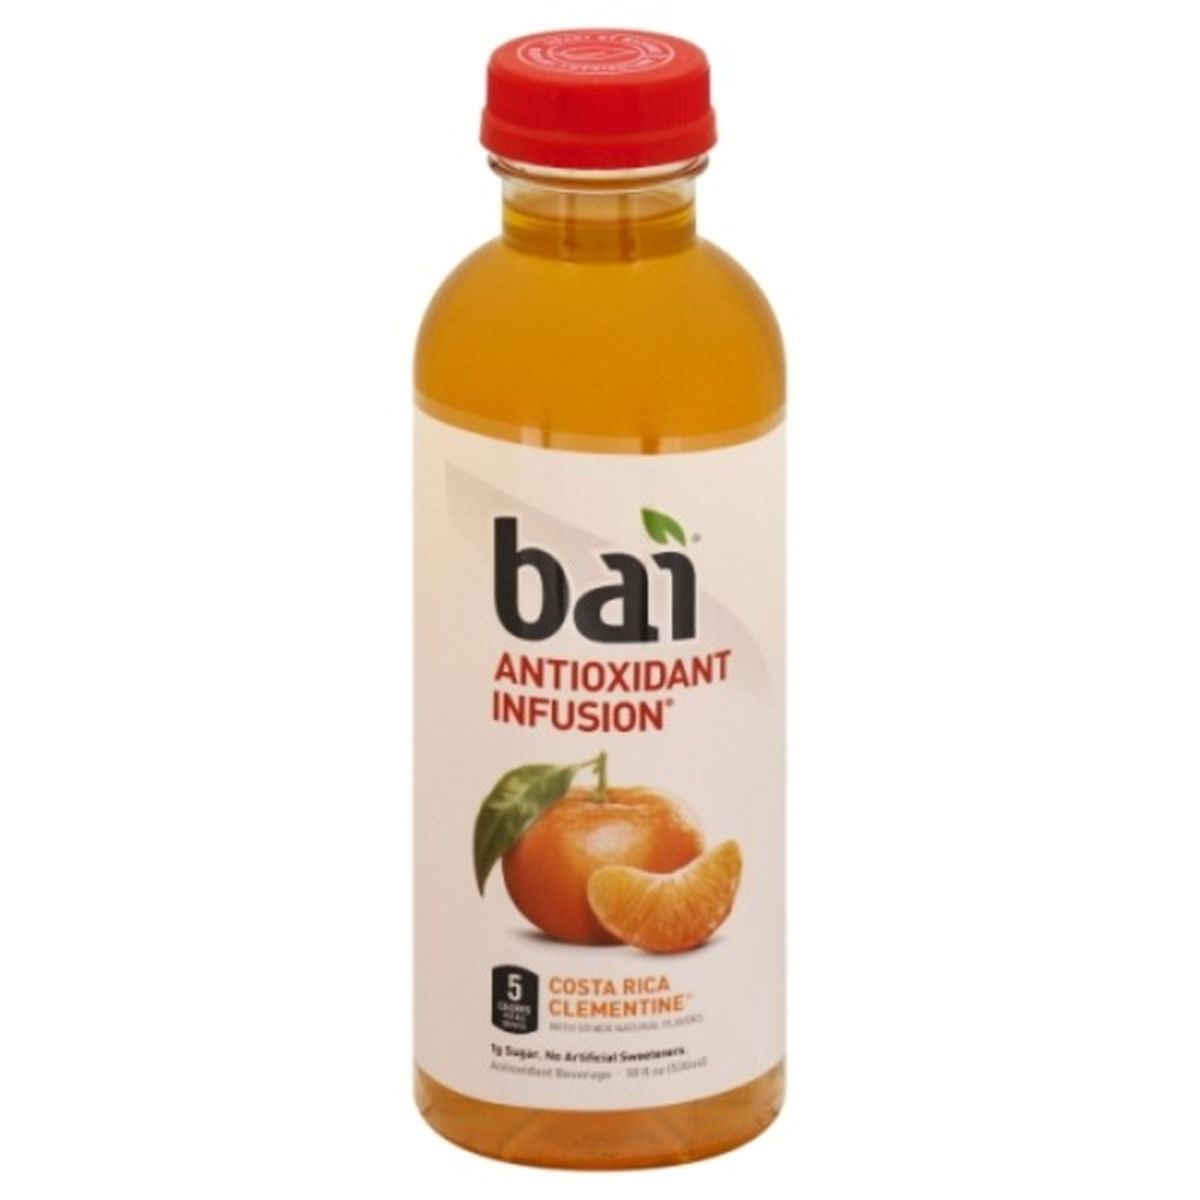 Calories in Bai Antioxidant Infusion, Costa Rica Clementine